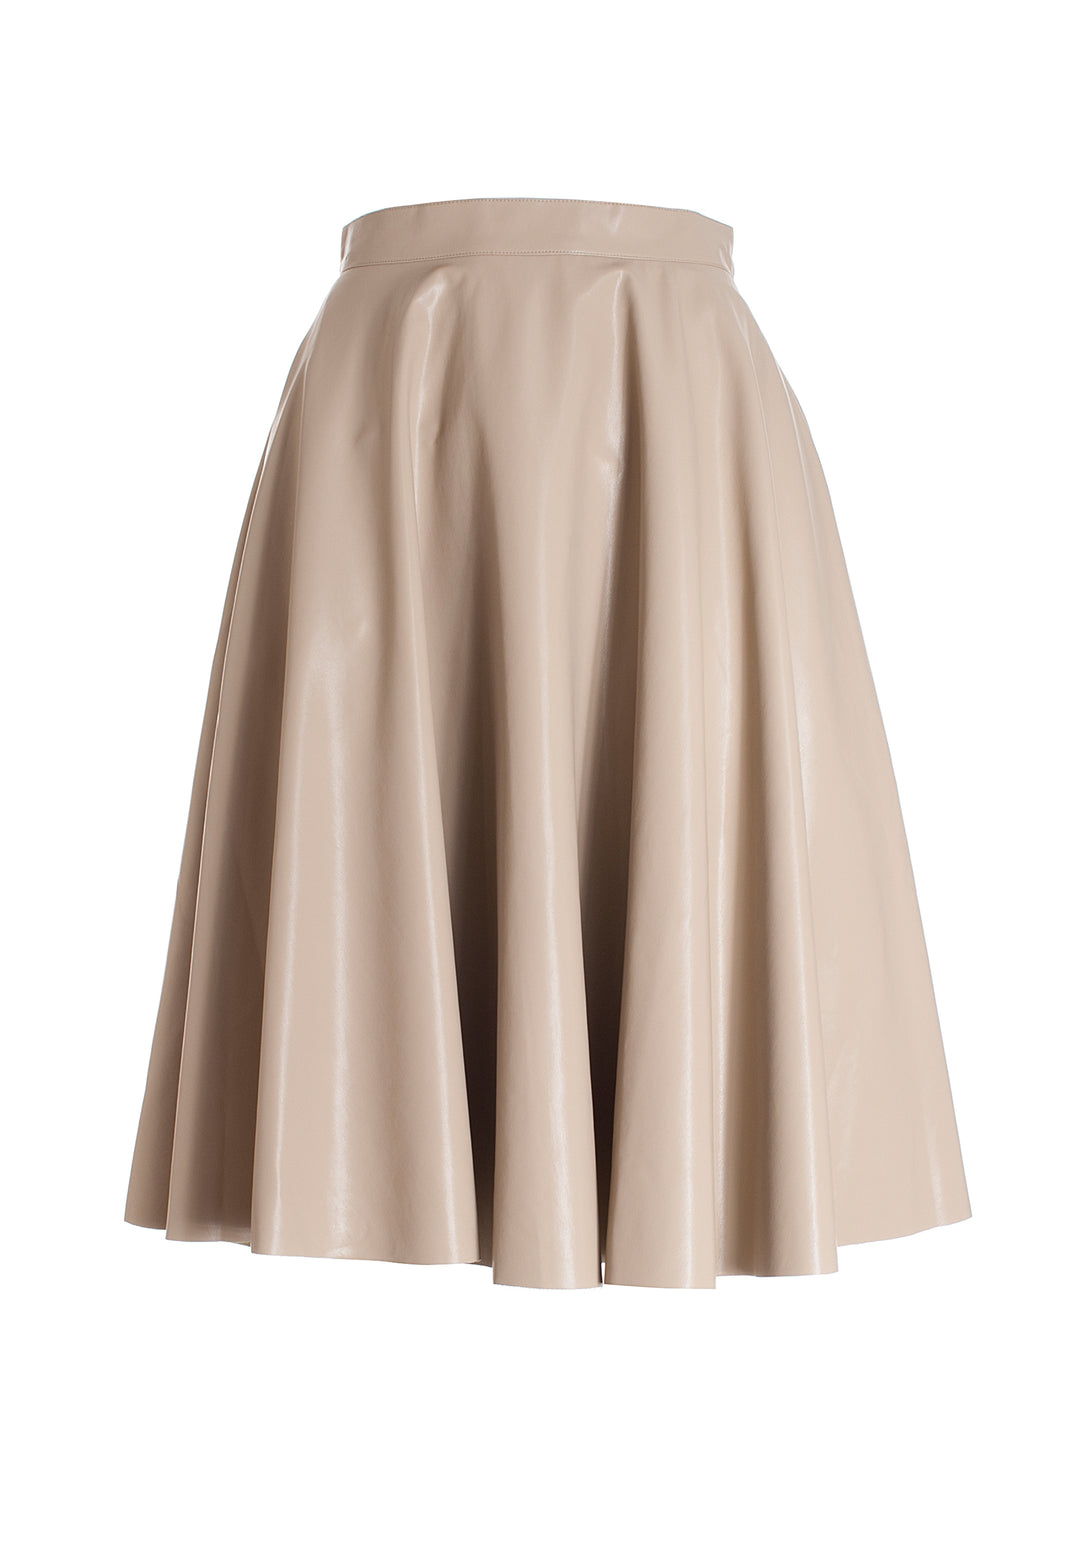 Flare full skirt made in eco leather